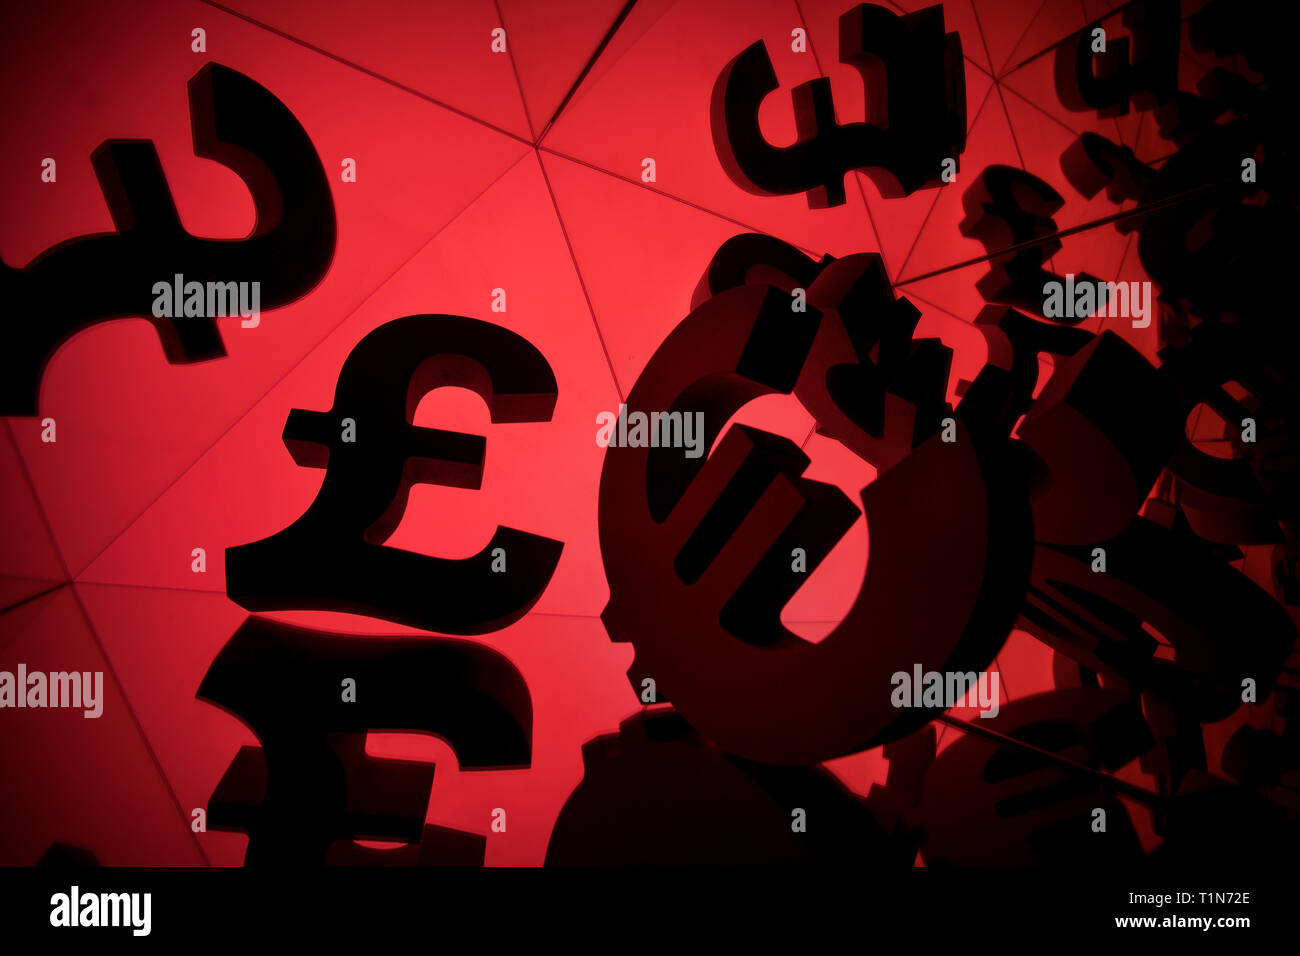 Euro Currency Symbol With Many Mirroring Images of Itself on Red Background Stock Photo